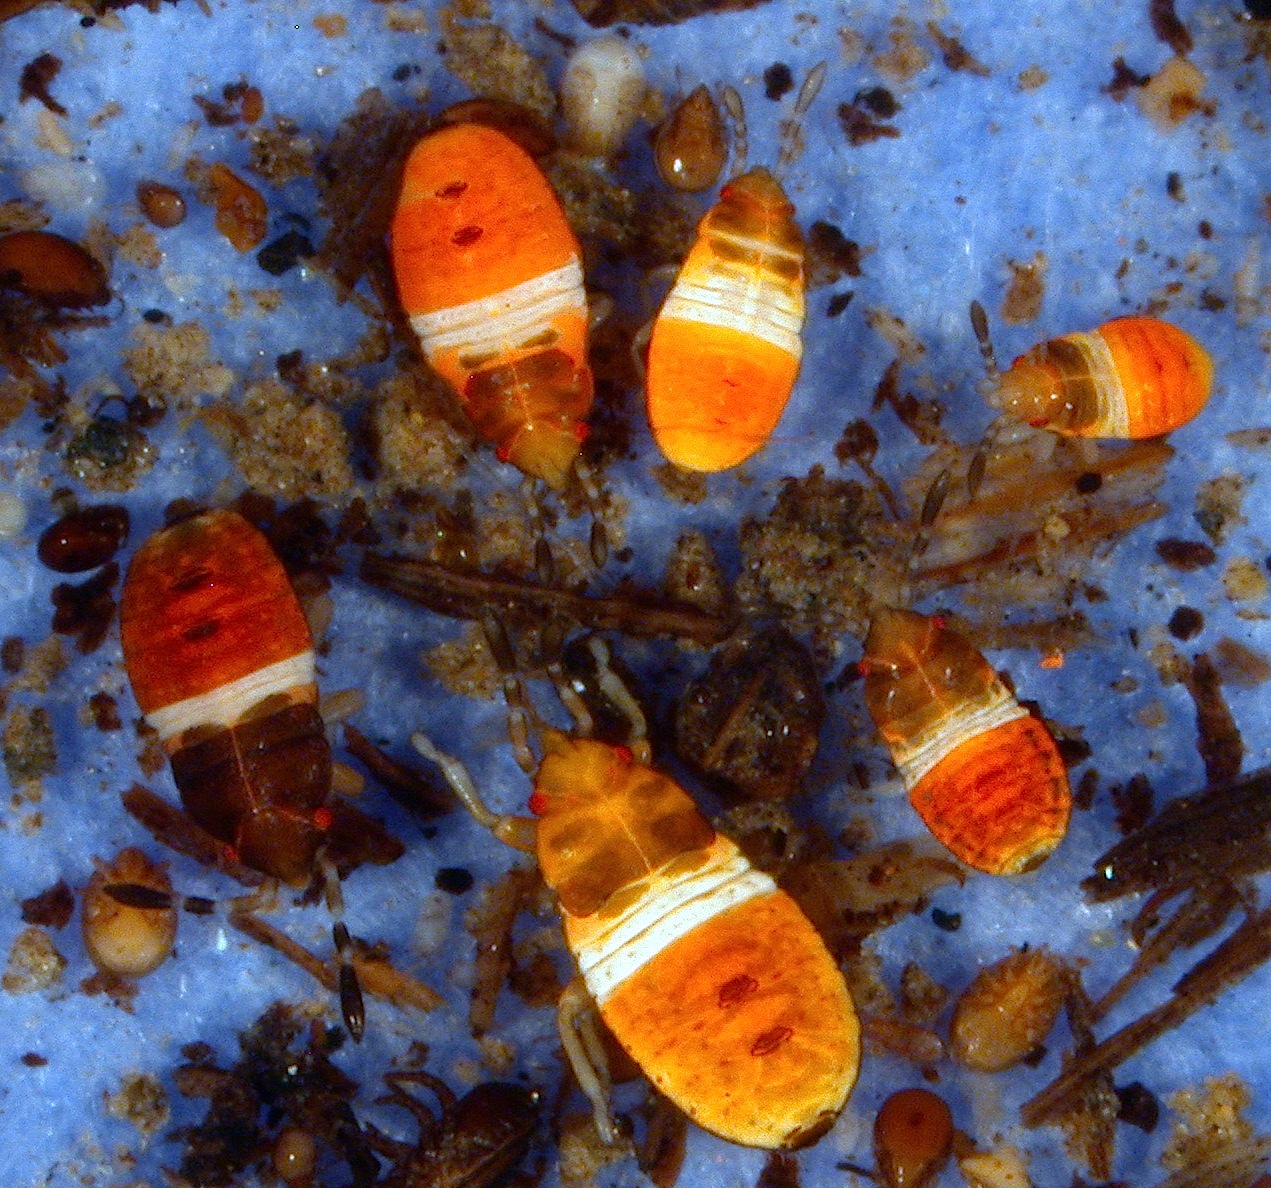 Figure 15. Chinch bug nymphs with bright orange bodies and broad white band across the back (<em>Photo Credit: J. Obermeyer</em>).